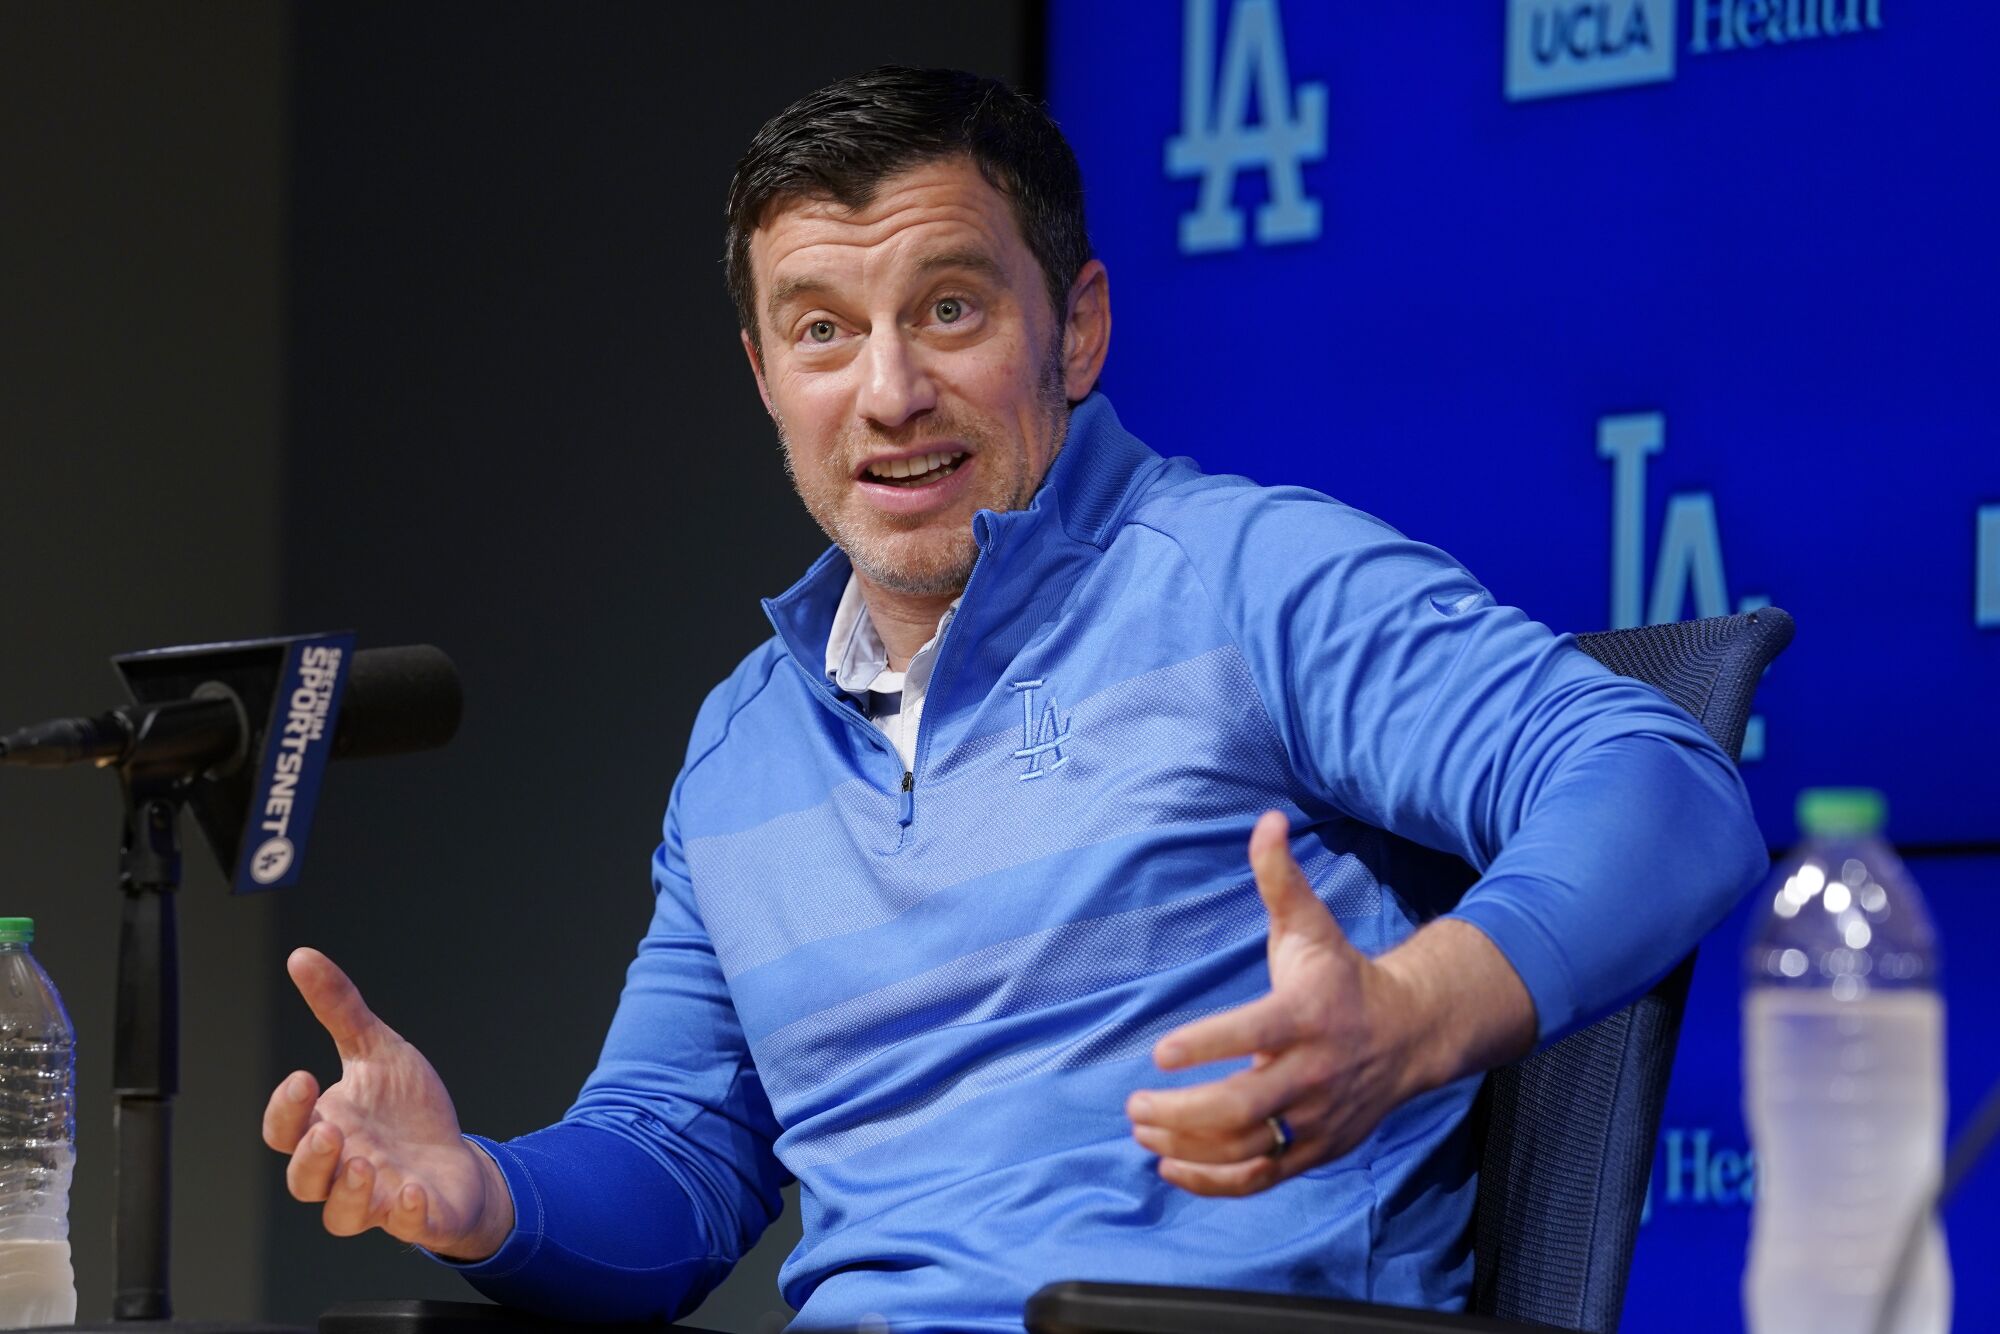 Andrew Friedman, the Dodgers' president of baseball operations, answers questions during a news conference.